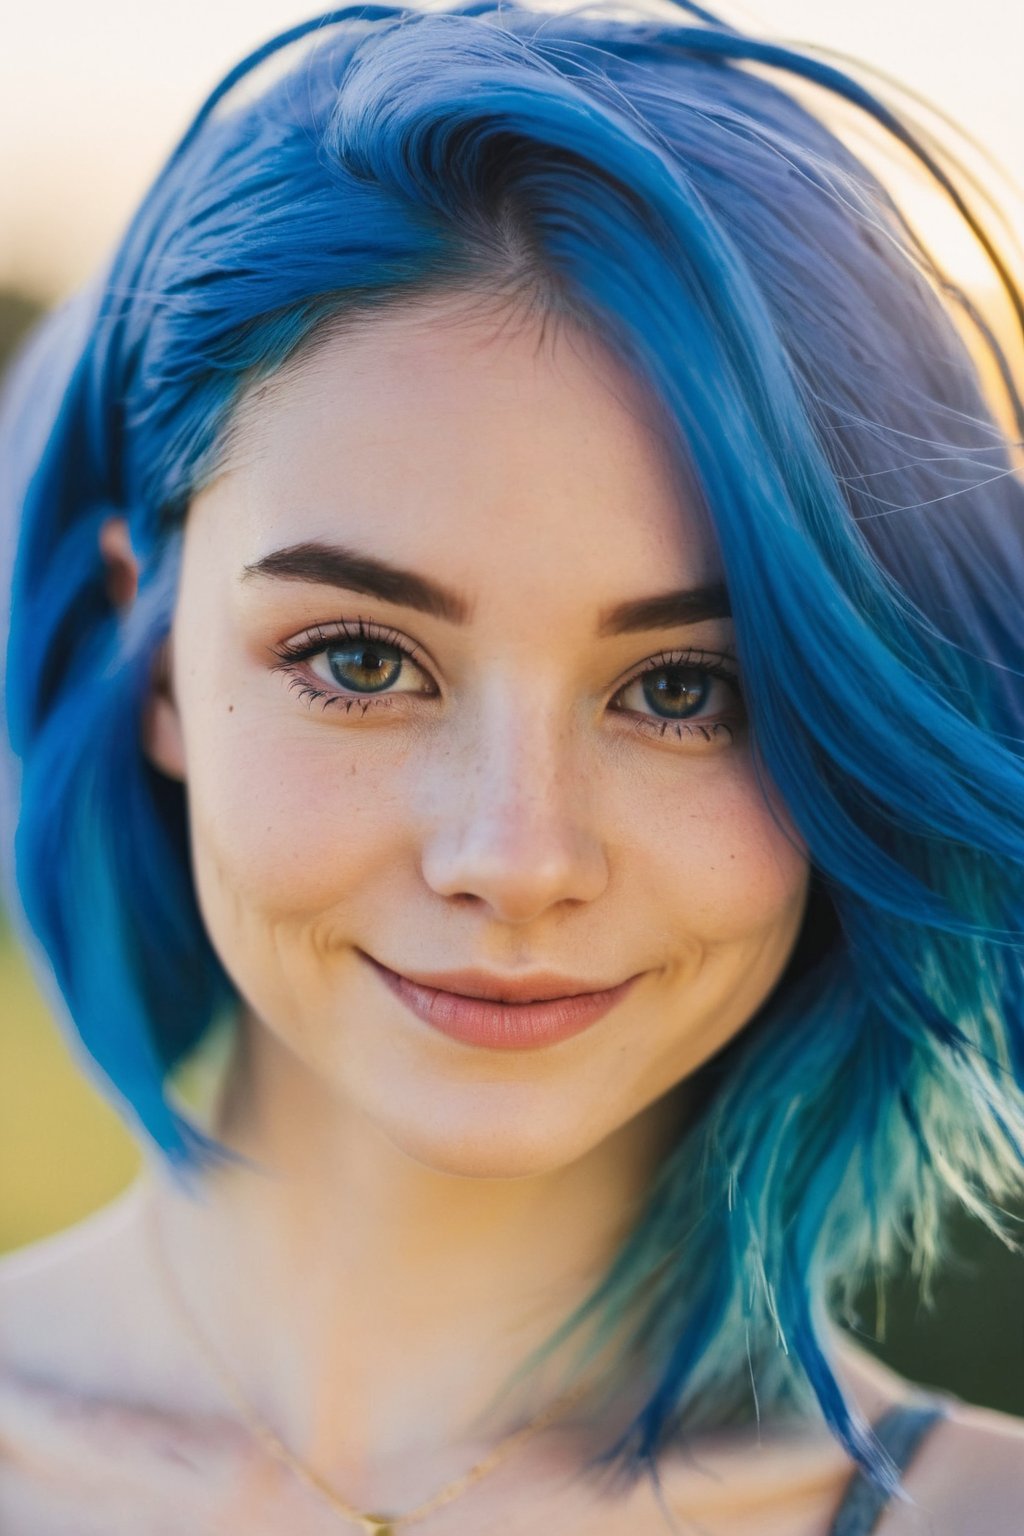 upper body of 22 years old blue hair woman, smiling under the sunlight